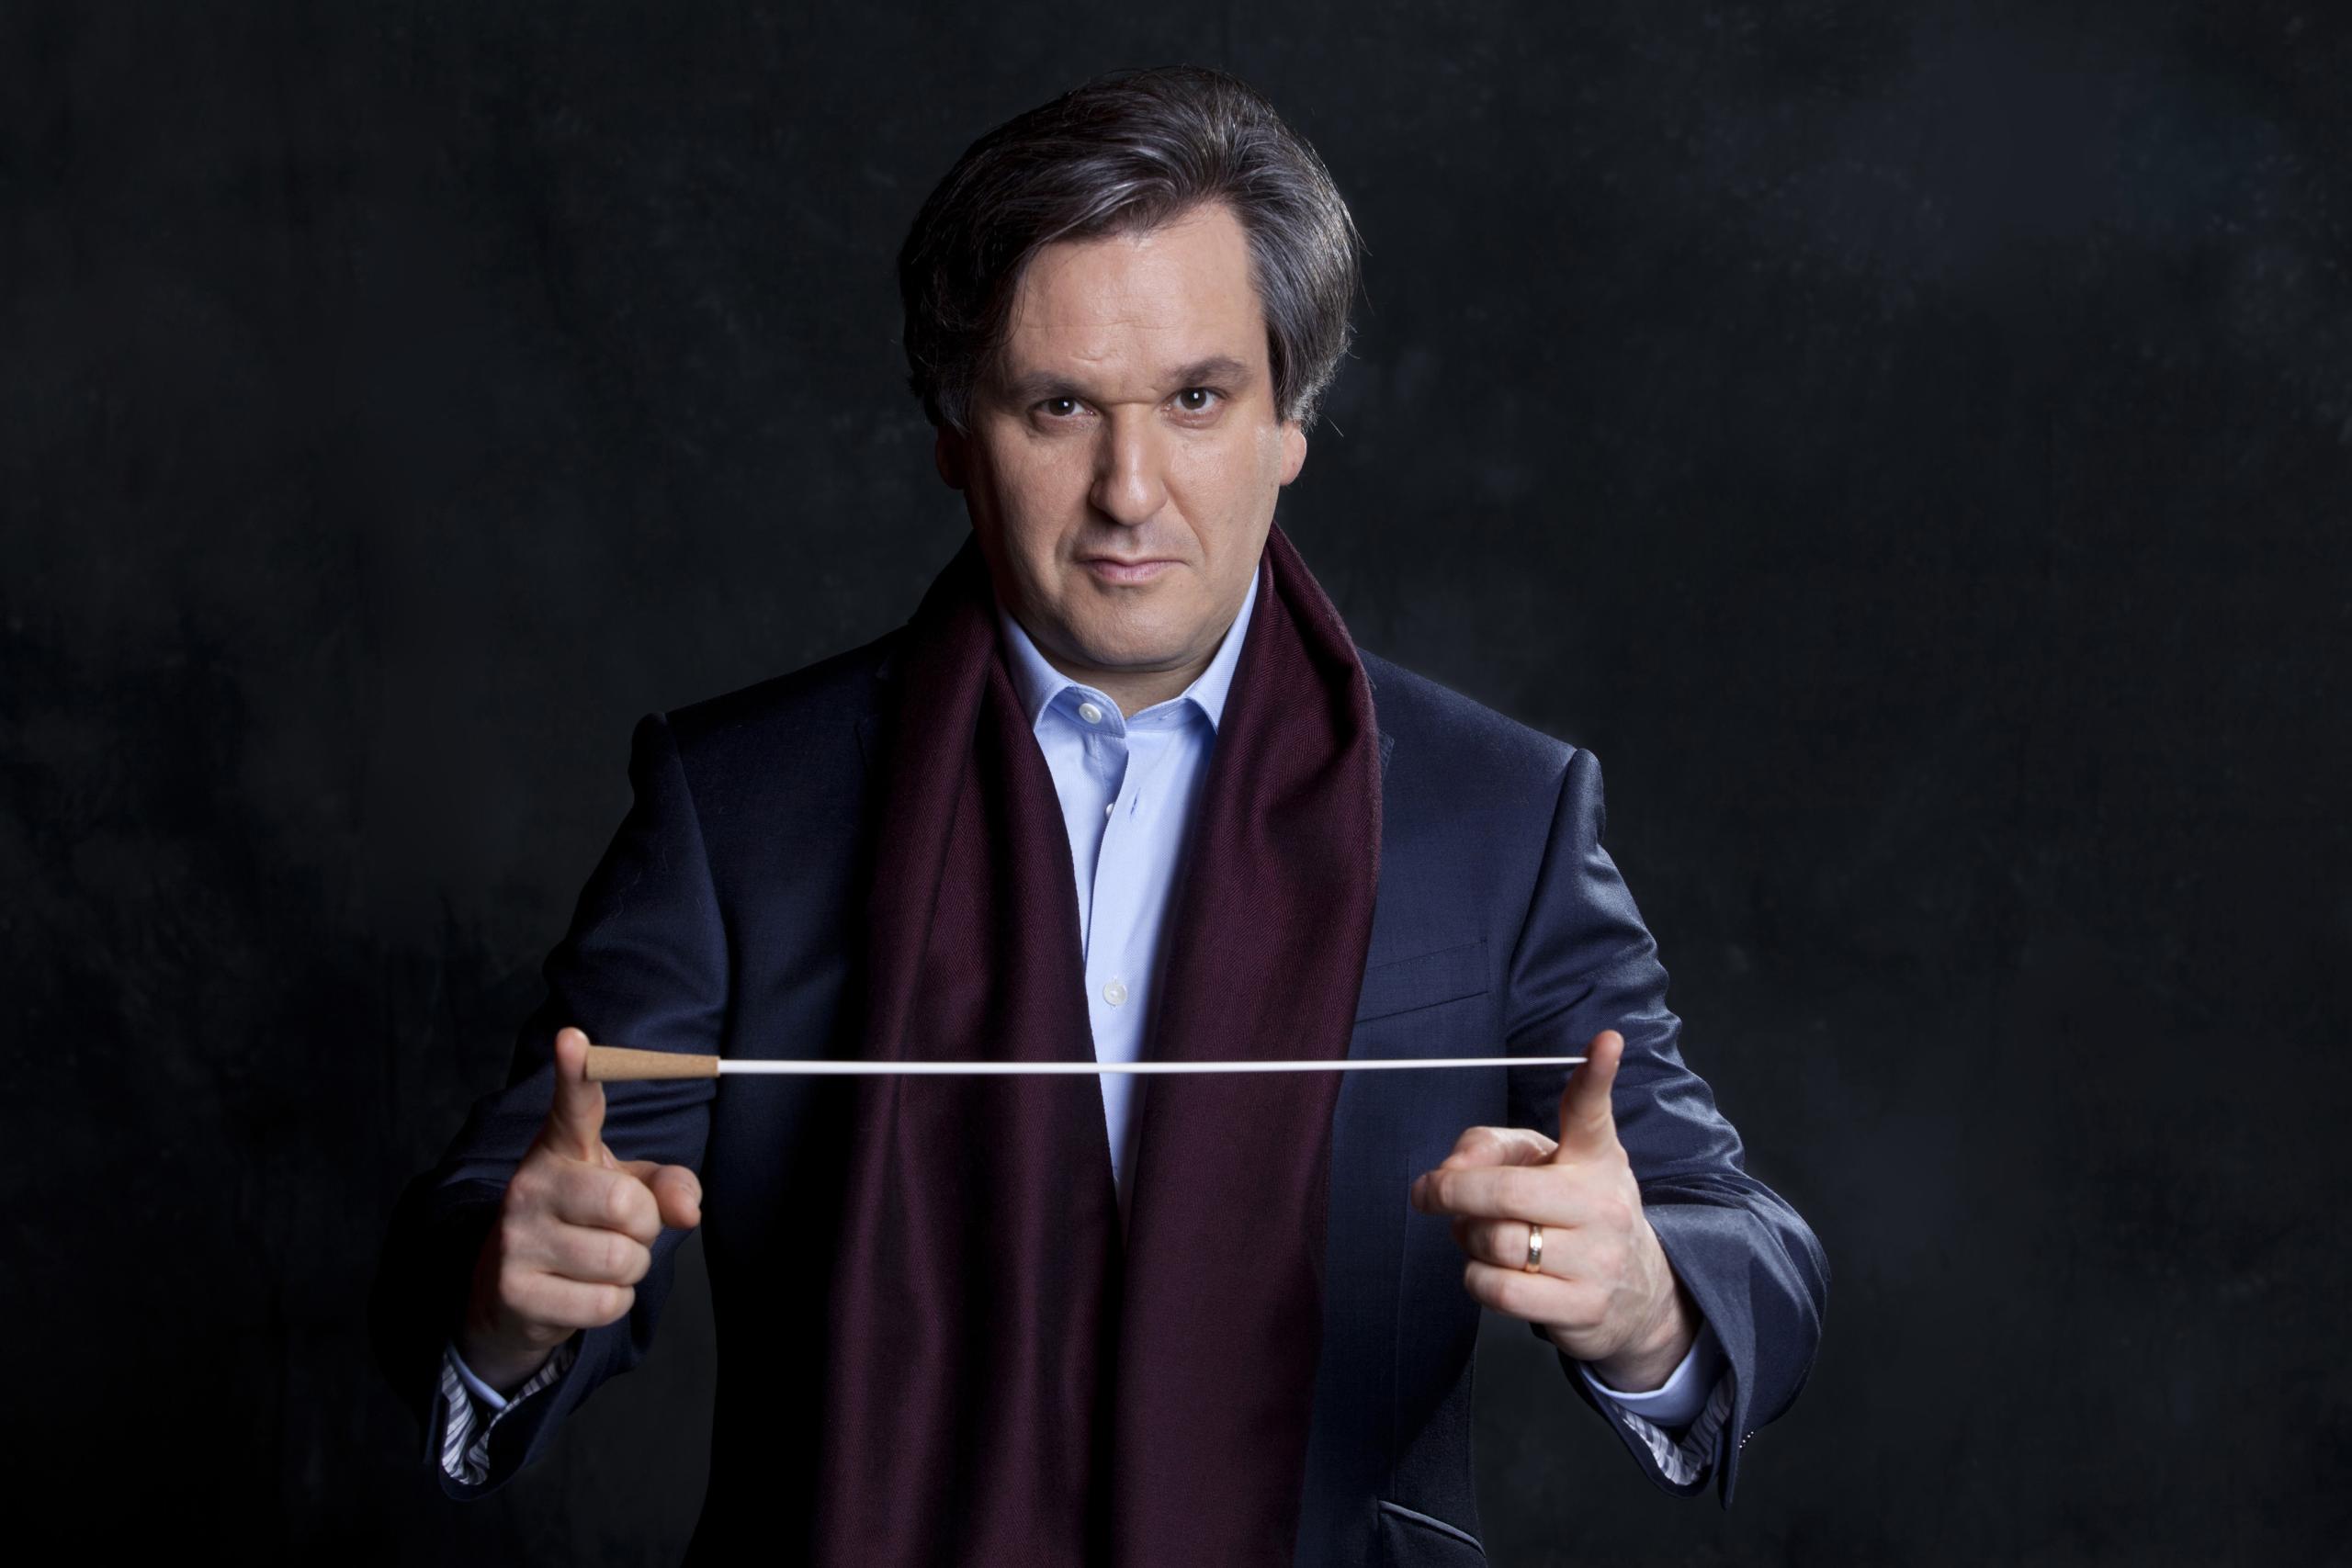 The conductor presents his baton. He stands in front of a dark background, wearing a blue suit and a burgundy scarf.